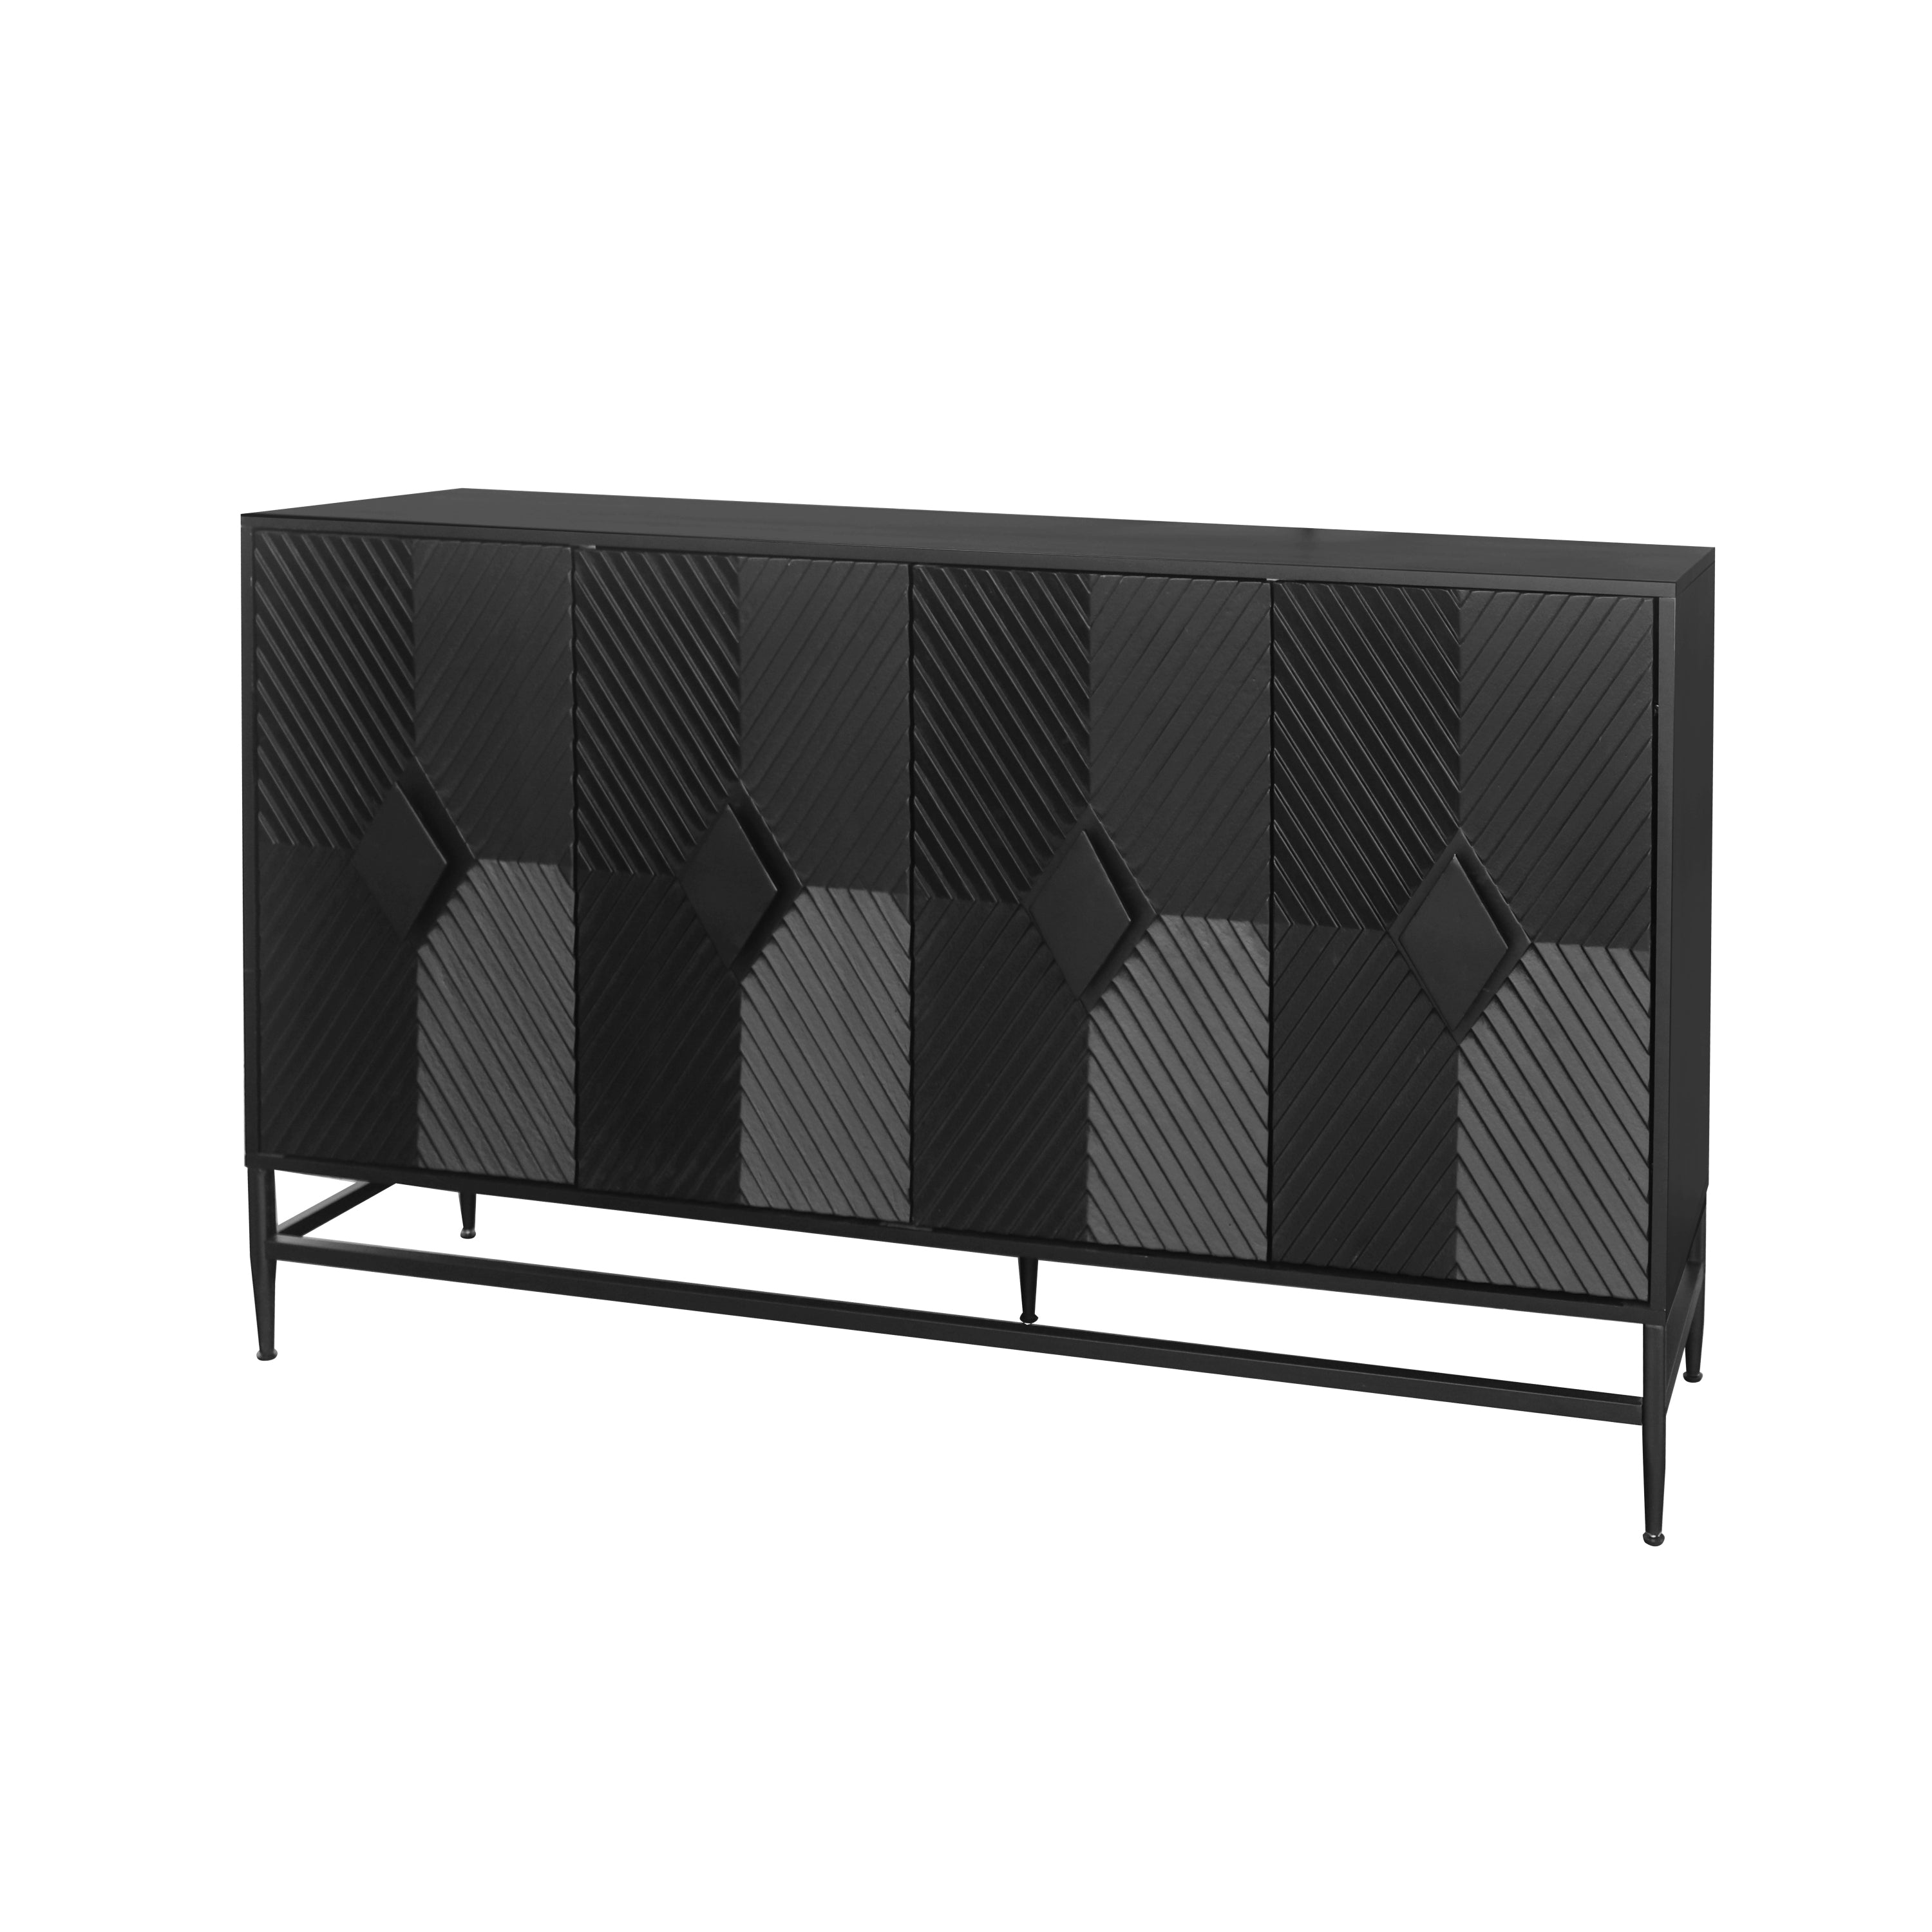 Accent Black Lacquered 4 Door Wooden Cabinet Sideboard Buffet Server Cabinet Storage Cabinet, for Living Room, Entryway, Hallway, Office, Kitchen and Dining Room